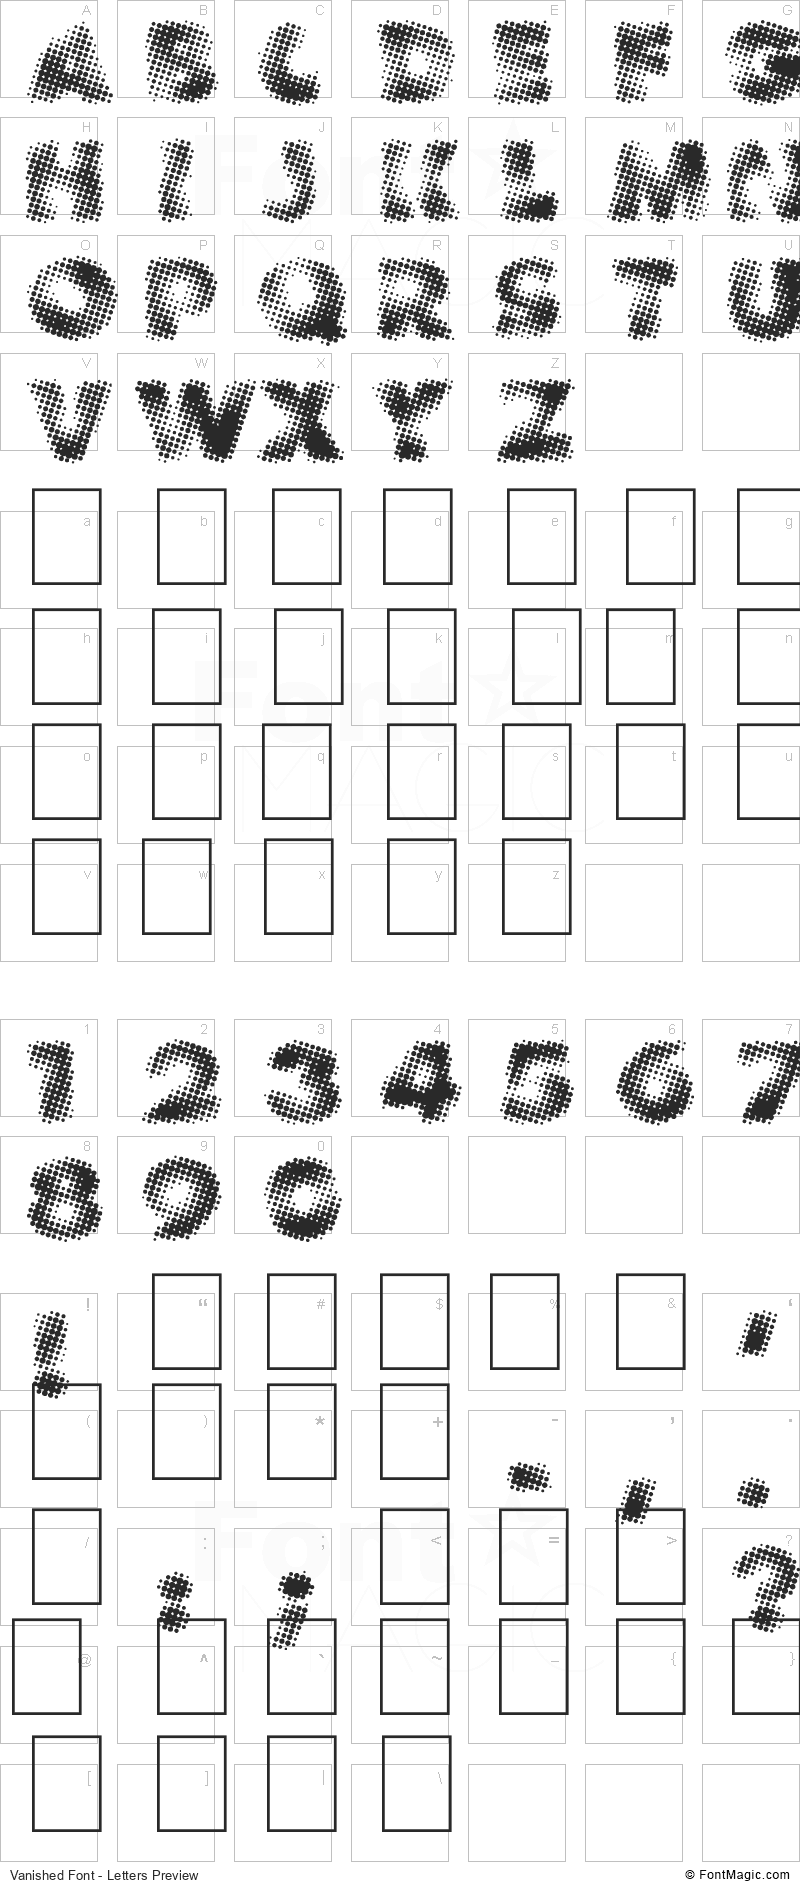 Vanished Font - All Latters Preview Chart